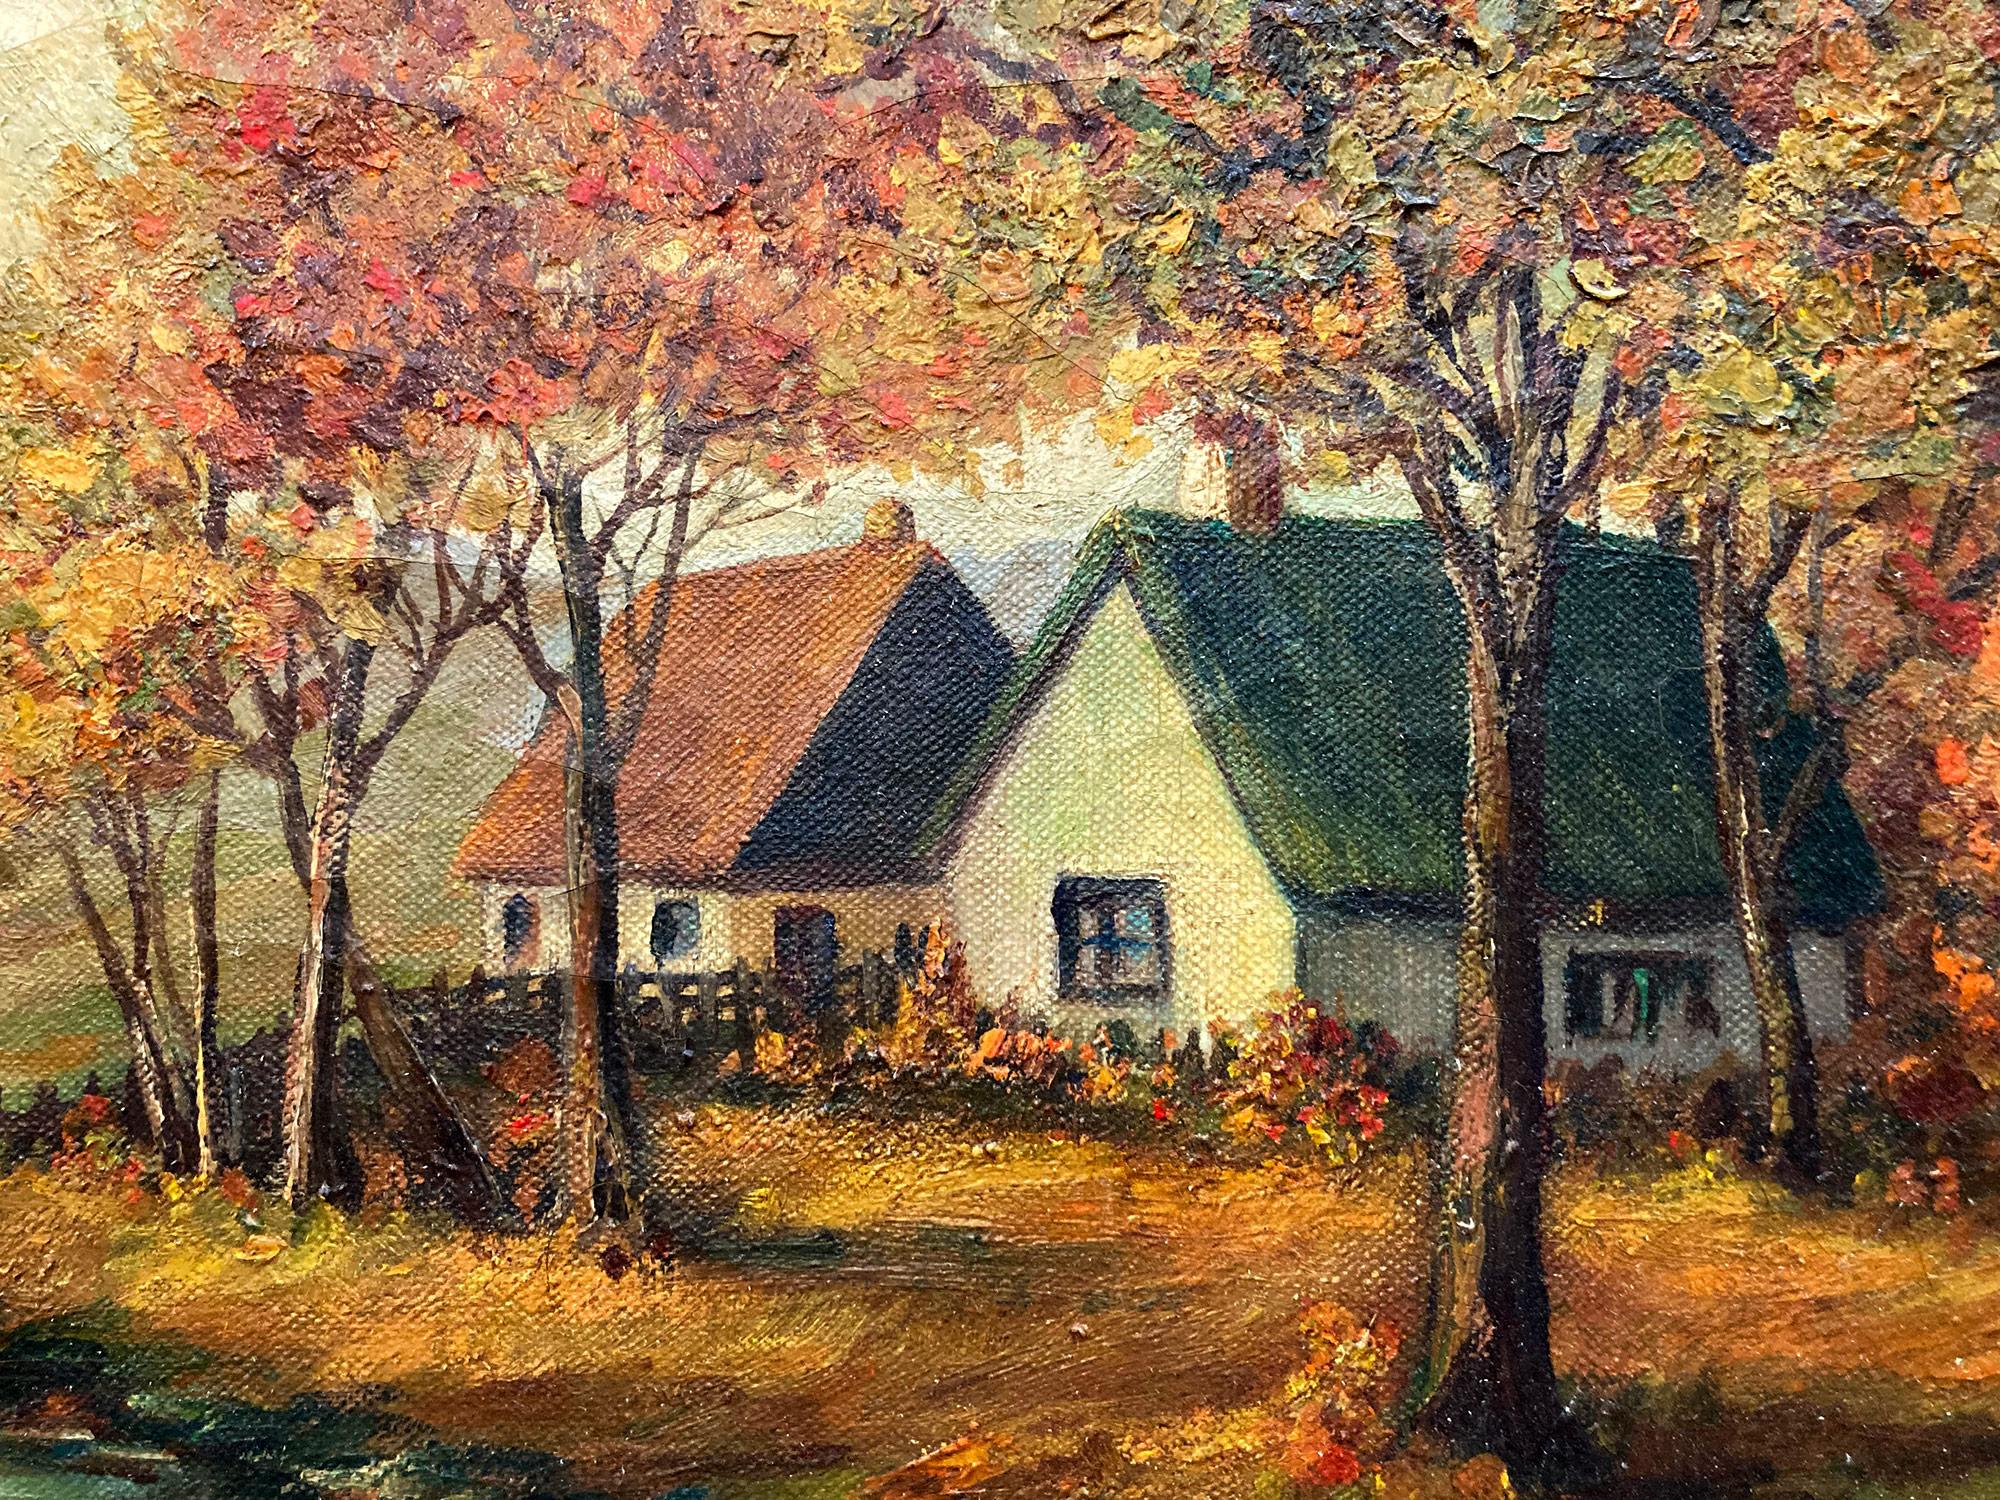 A wonderful depiction of cottages by the river with a mountain in the distance and autumn leaves falling by the country side. For this beautiful depiction, we find distinct elements that are unique to the earlier works of Marie Berger. Among other